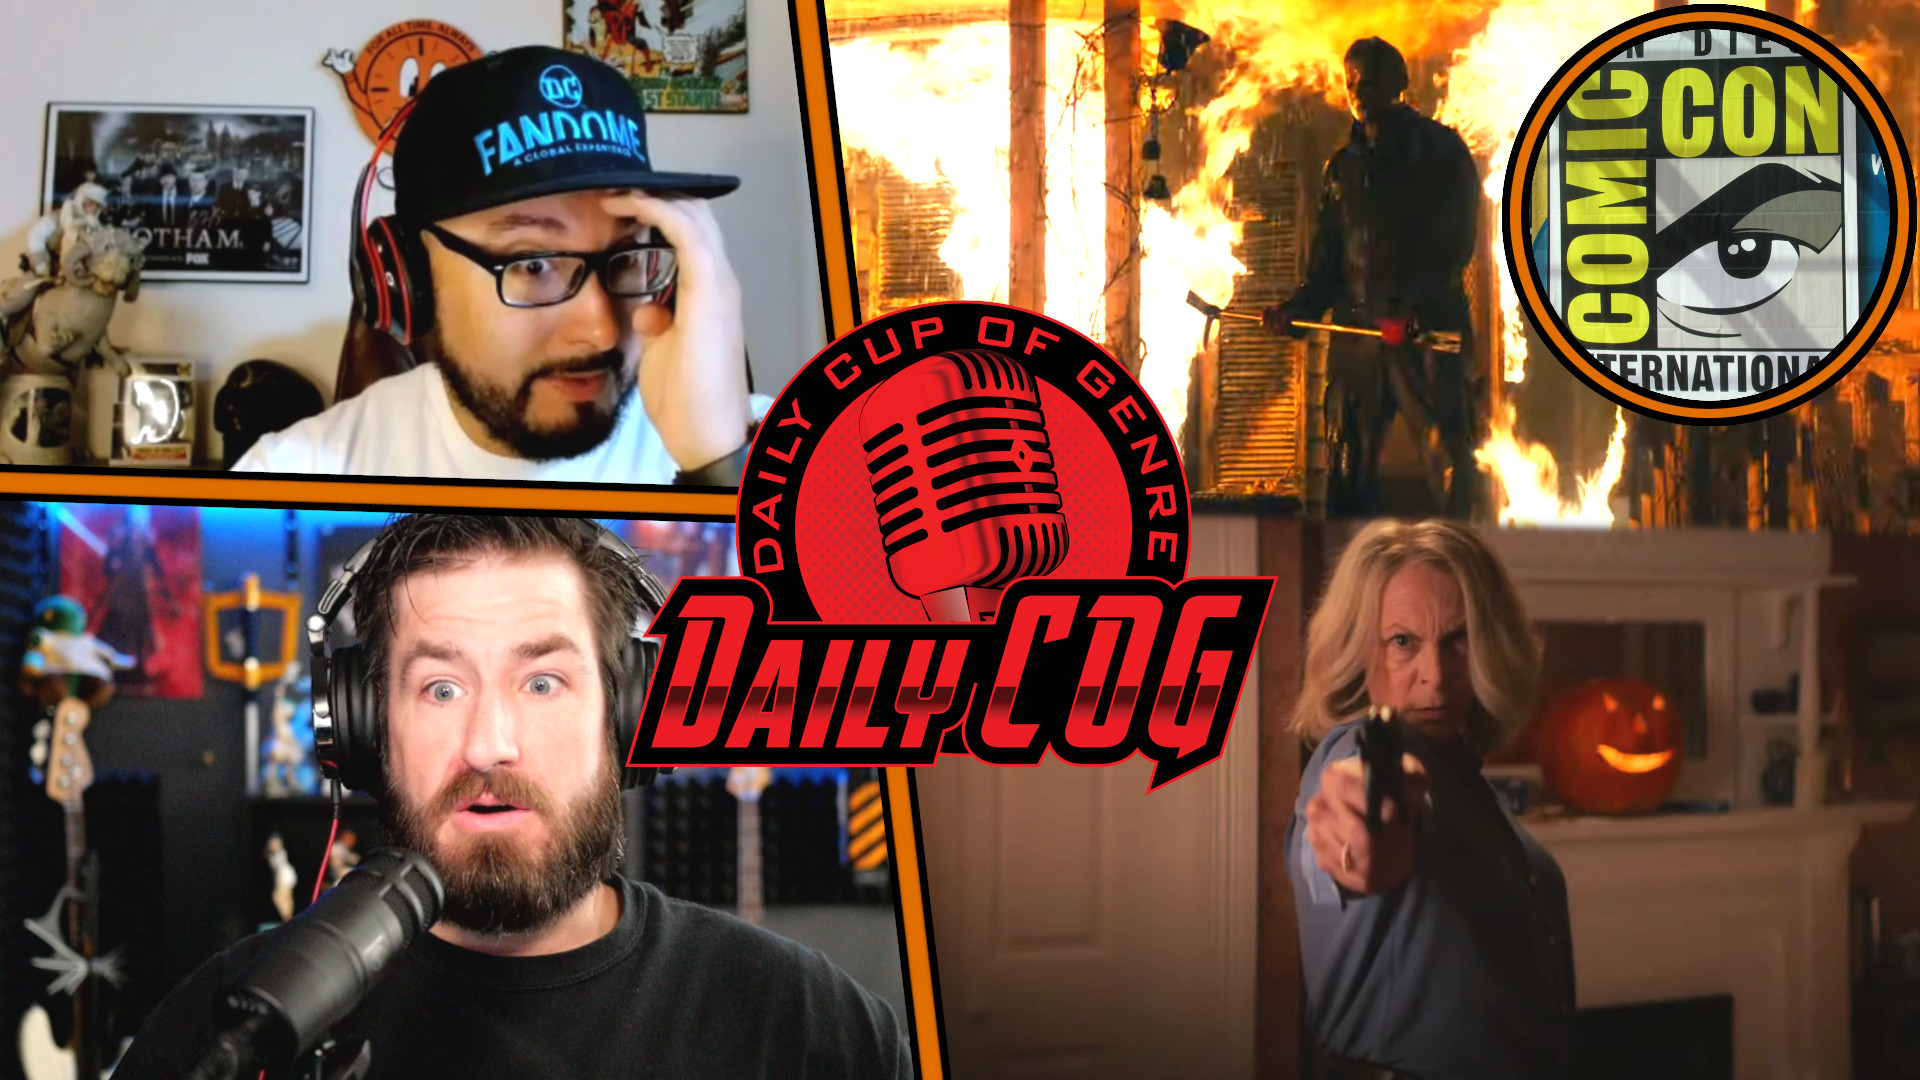 Halloween Ends (Maybe) Trailer Reaction & SDCC 2022 Schedule And Coverage | Daily COG